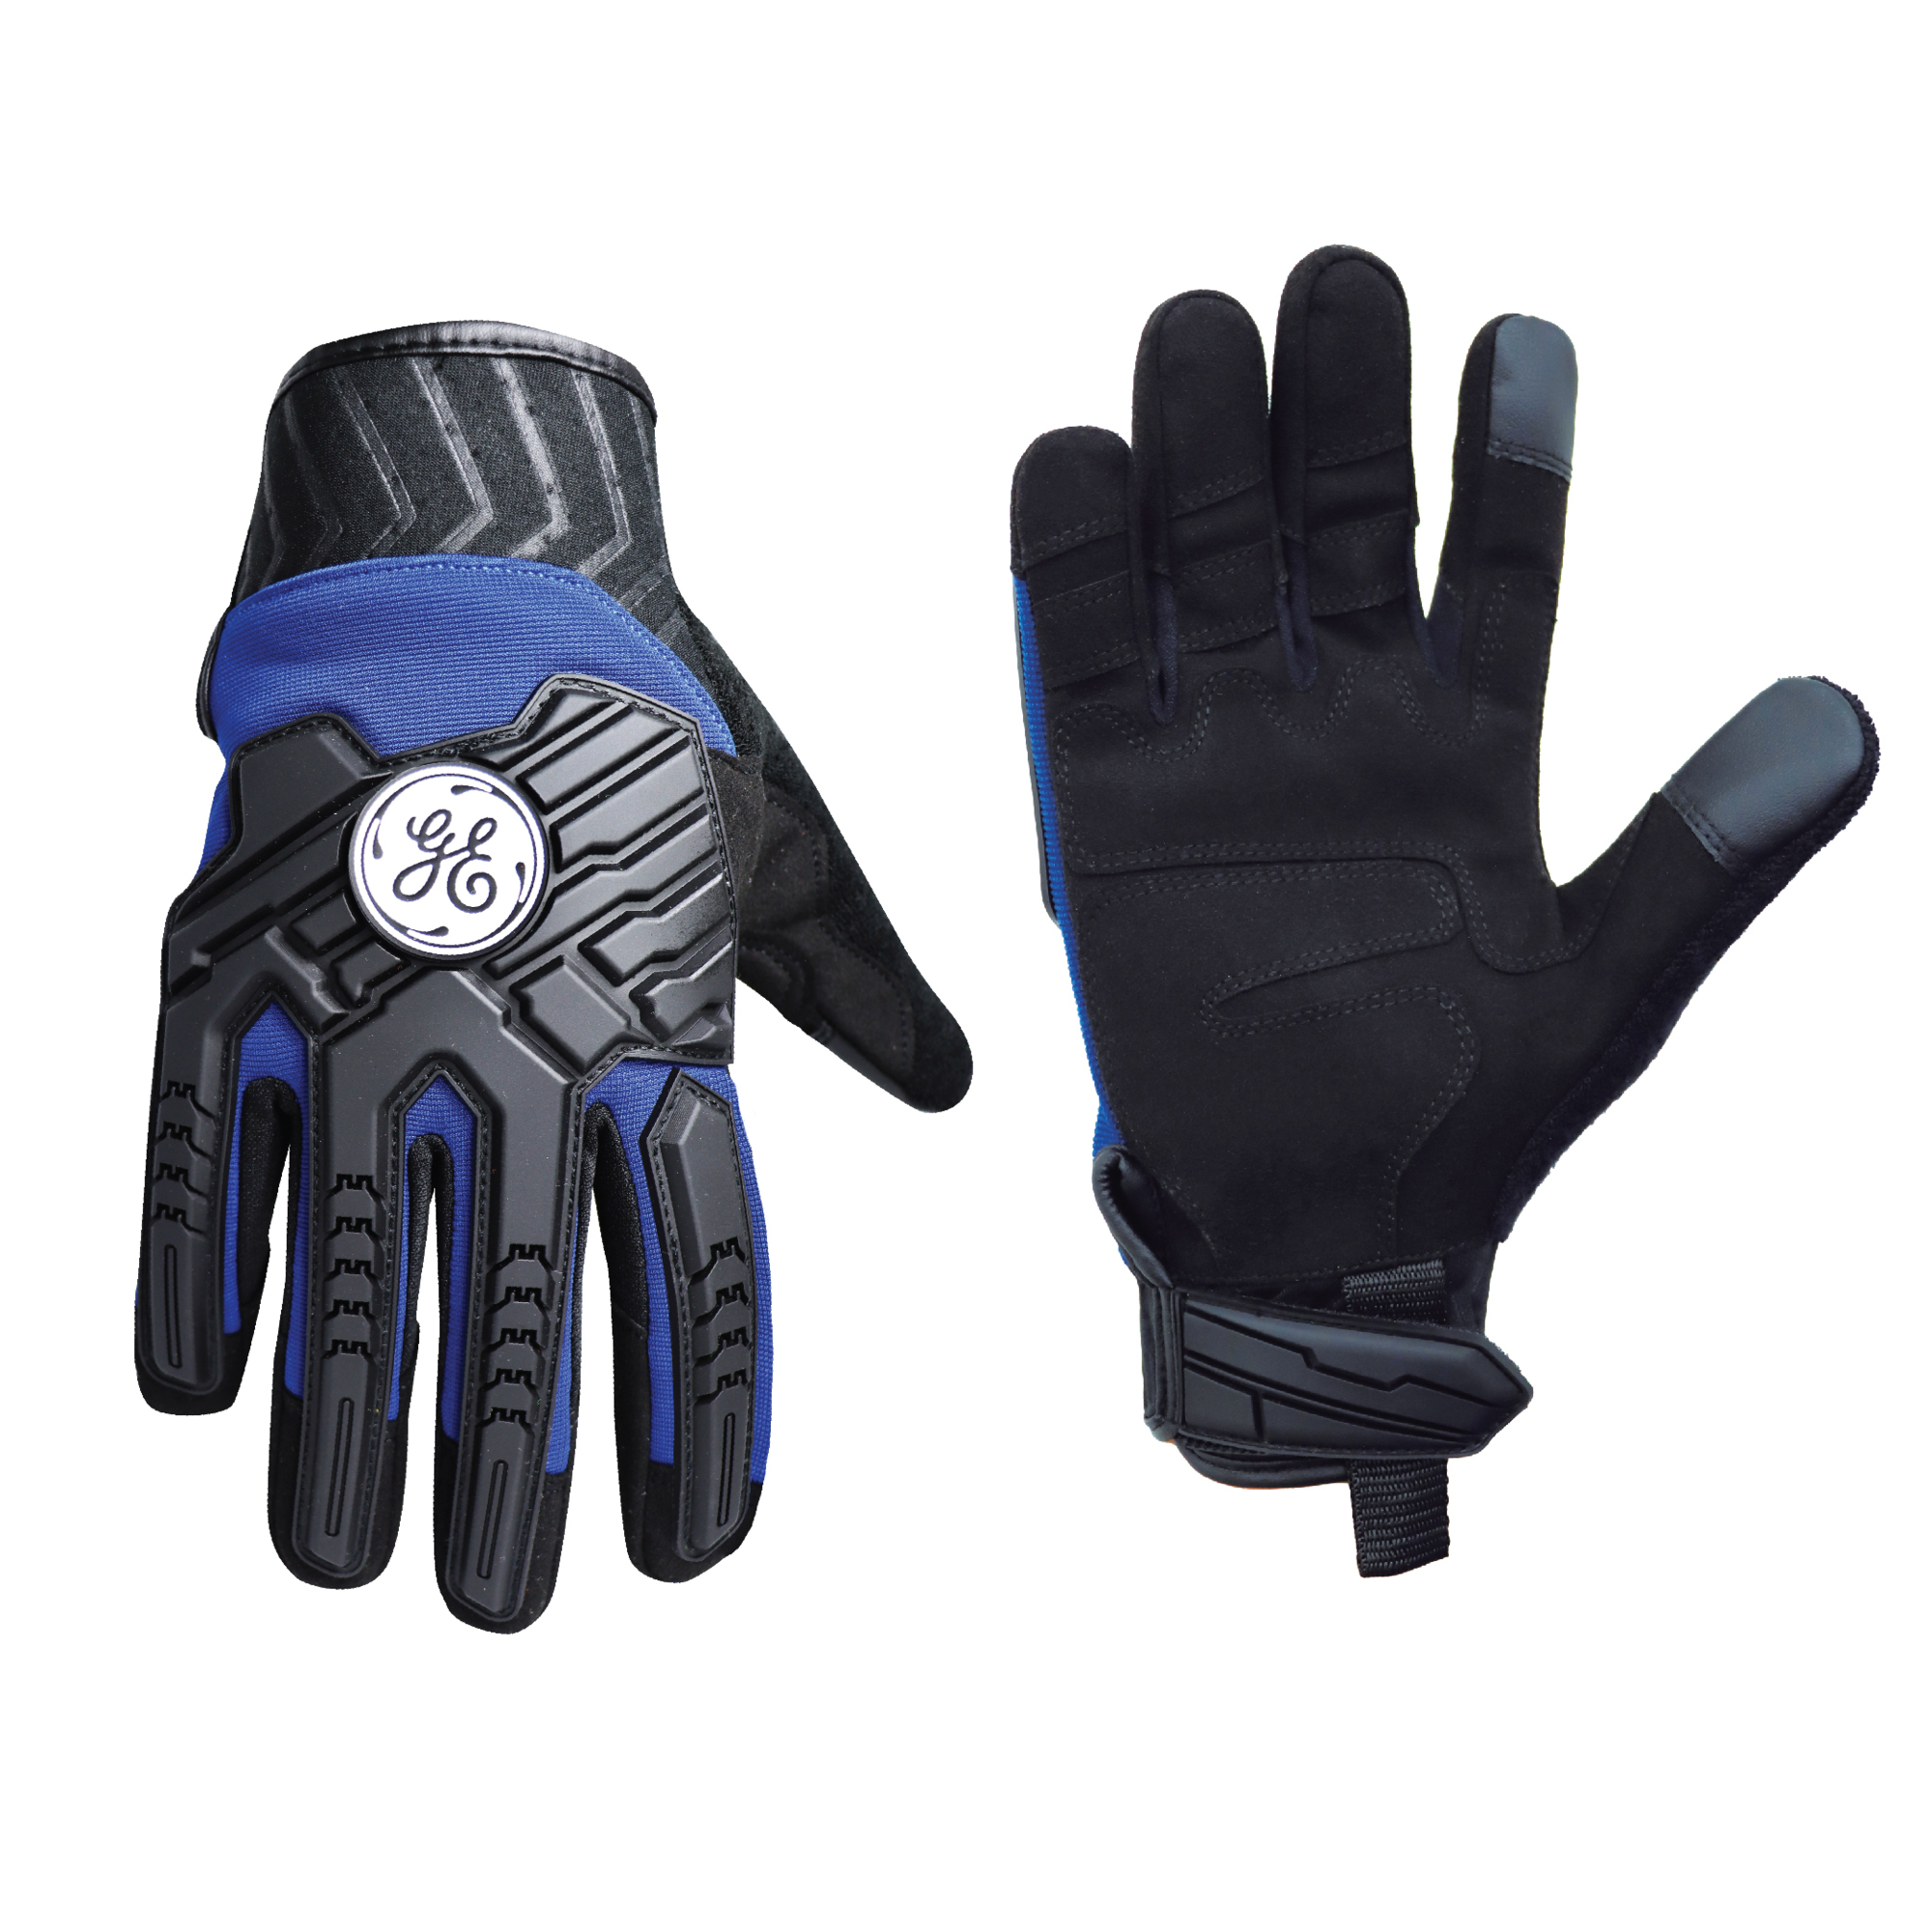 General Electric, Mechanic's Glove Blue L 1 pair, Size L, Included (qty.) 1, Model GG416LC